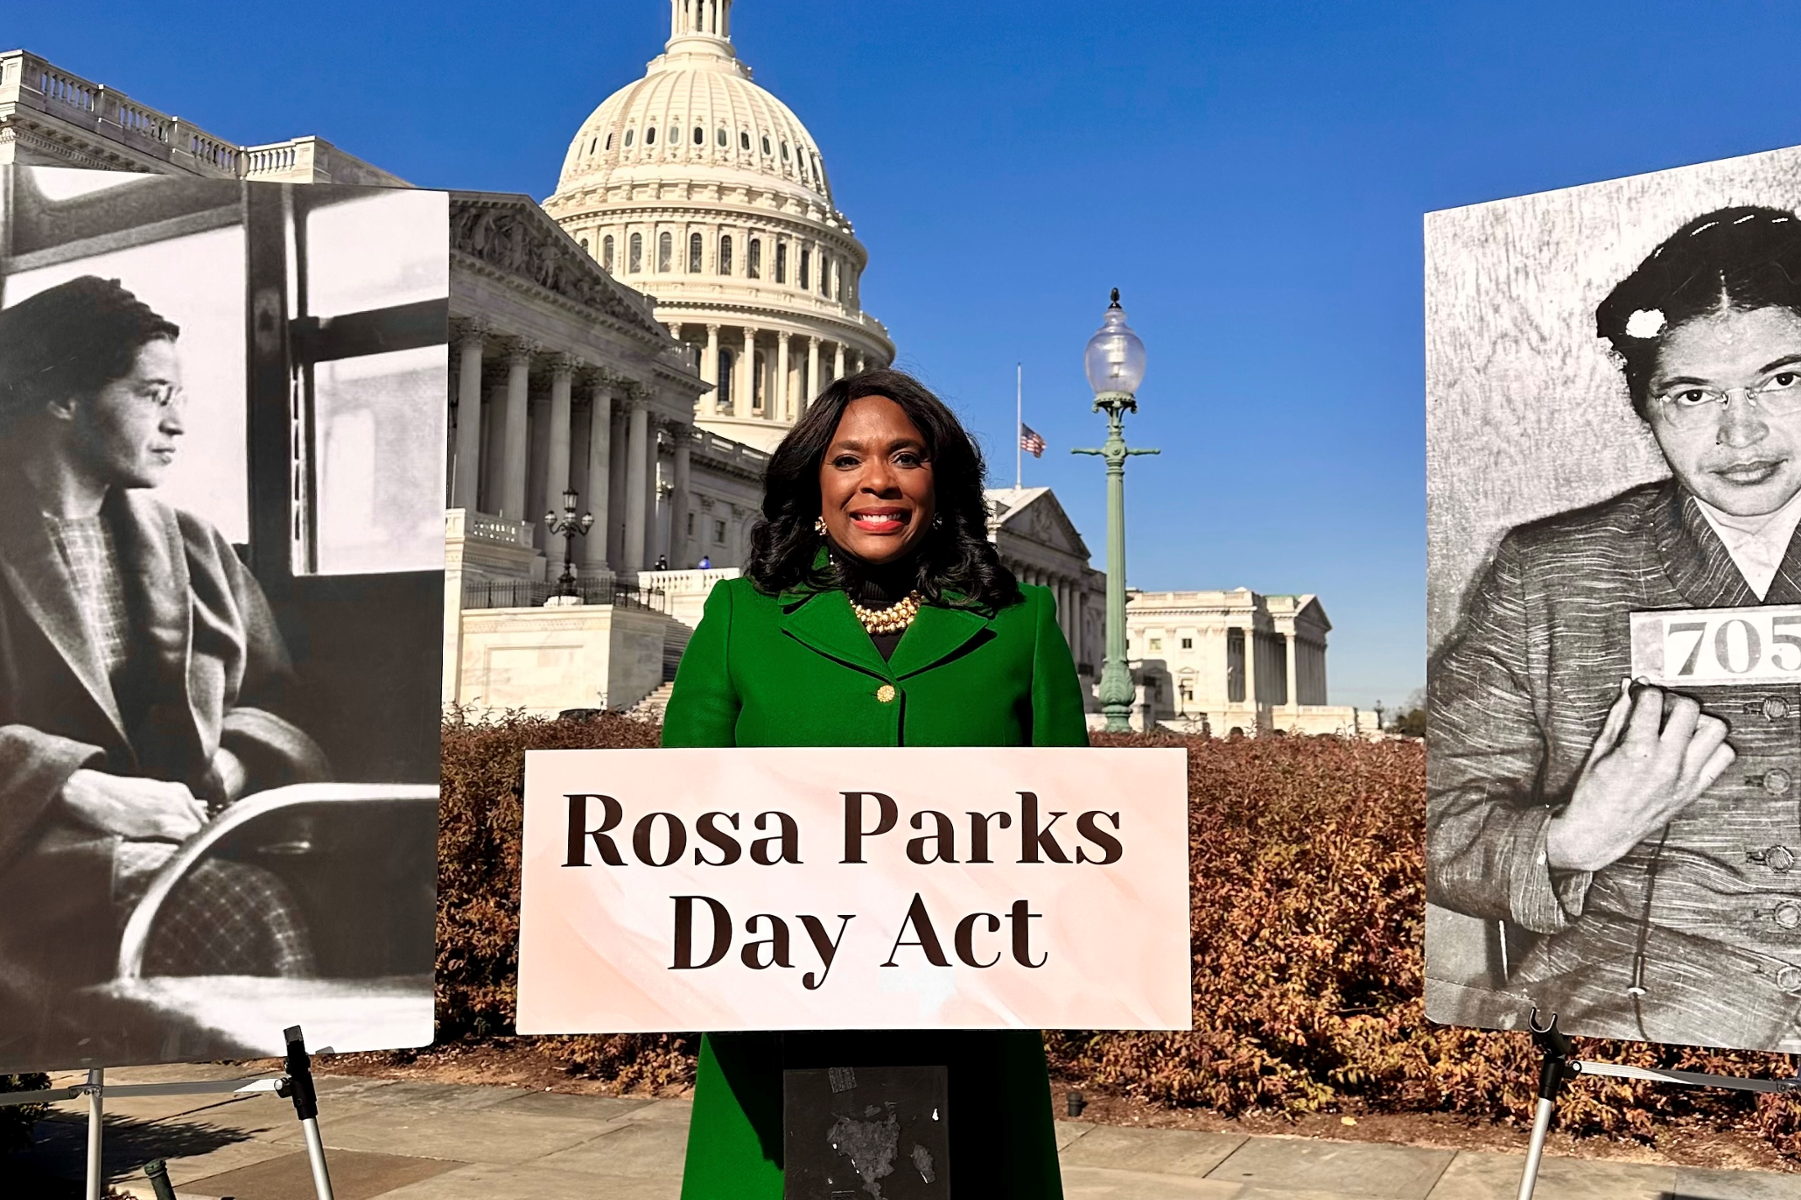 Read More - Ahead of the 68th Anniversary of Rosa Parks’ Arrest, Rep. Sewell Leads the Push for Rosa Parks Federal Holiday